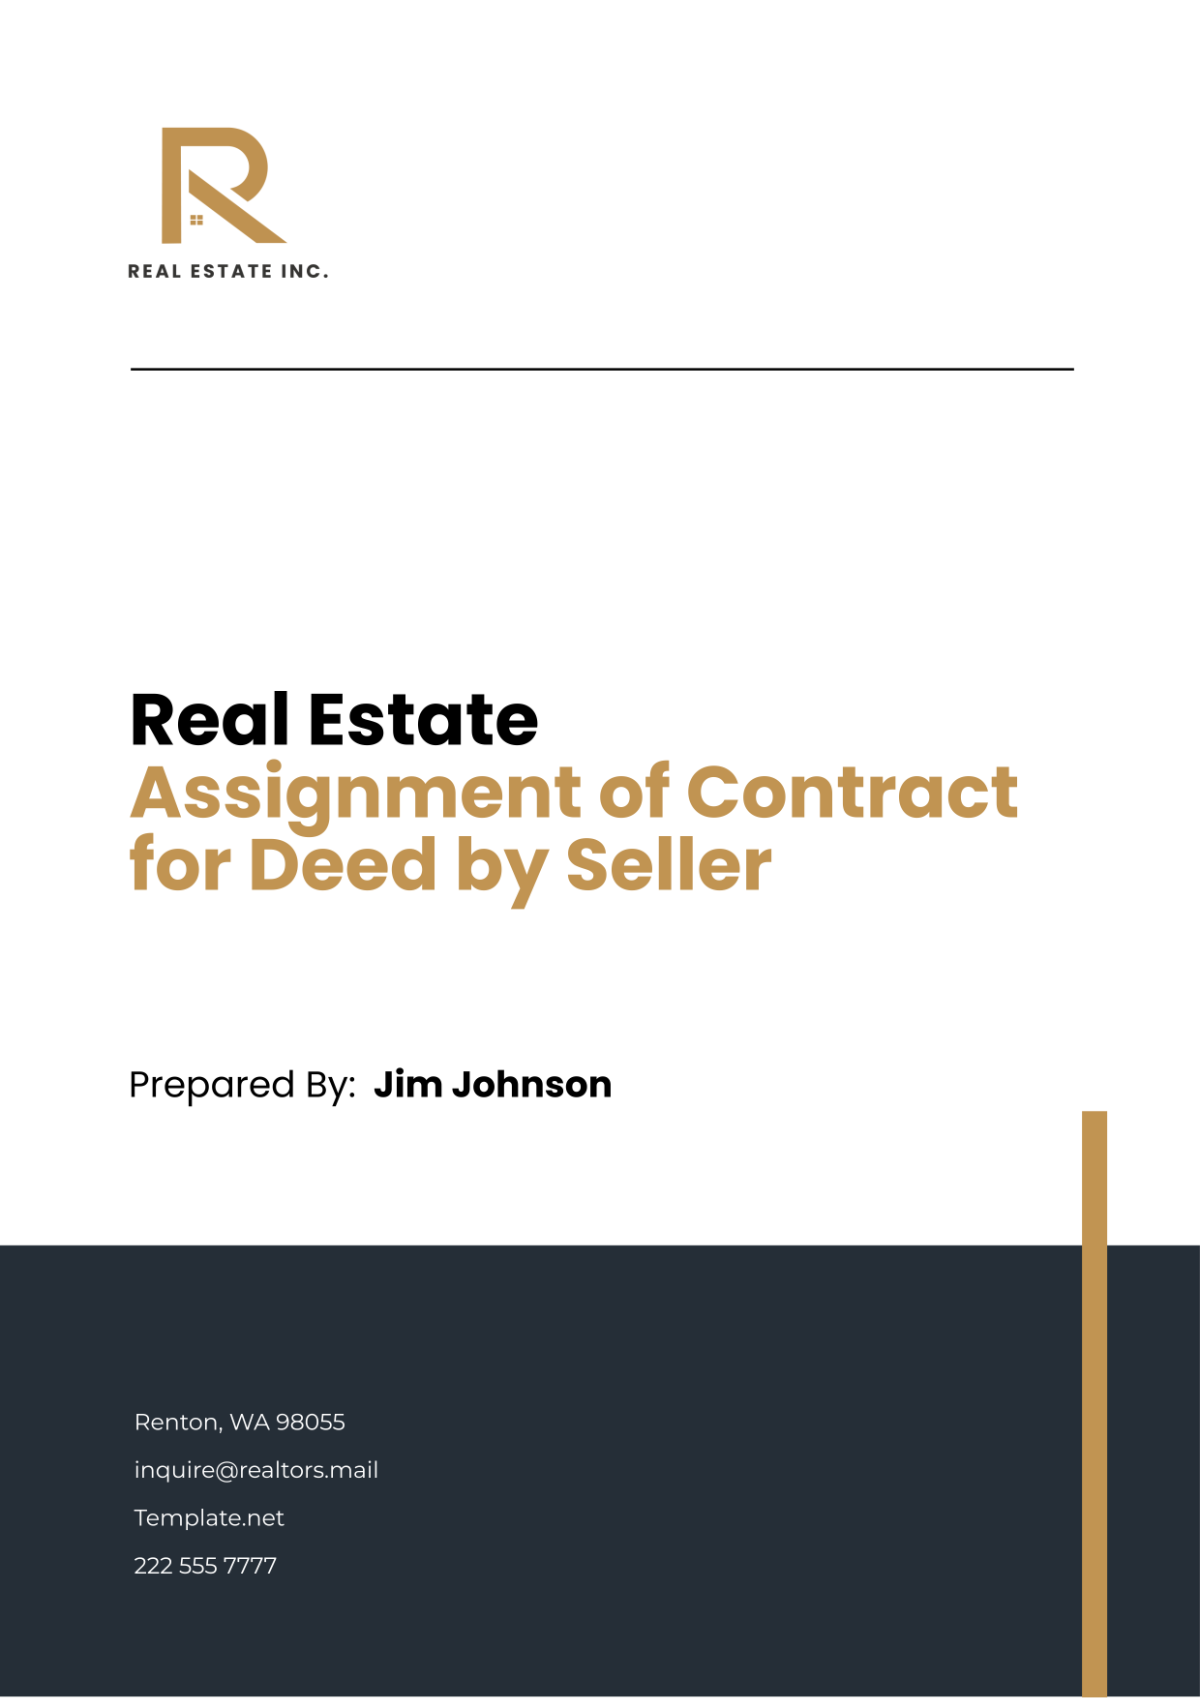 Free Real Estate Assignment of Contract for Deed by Seller Template